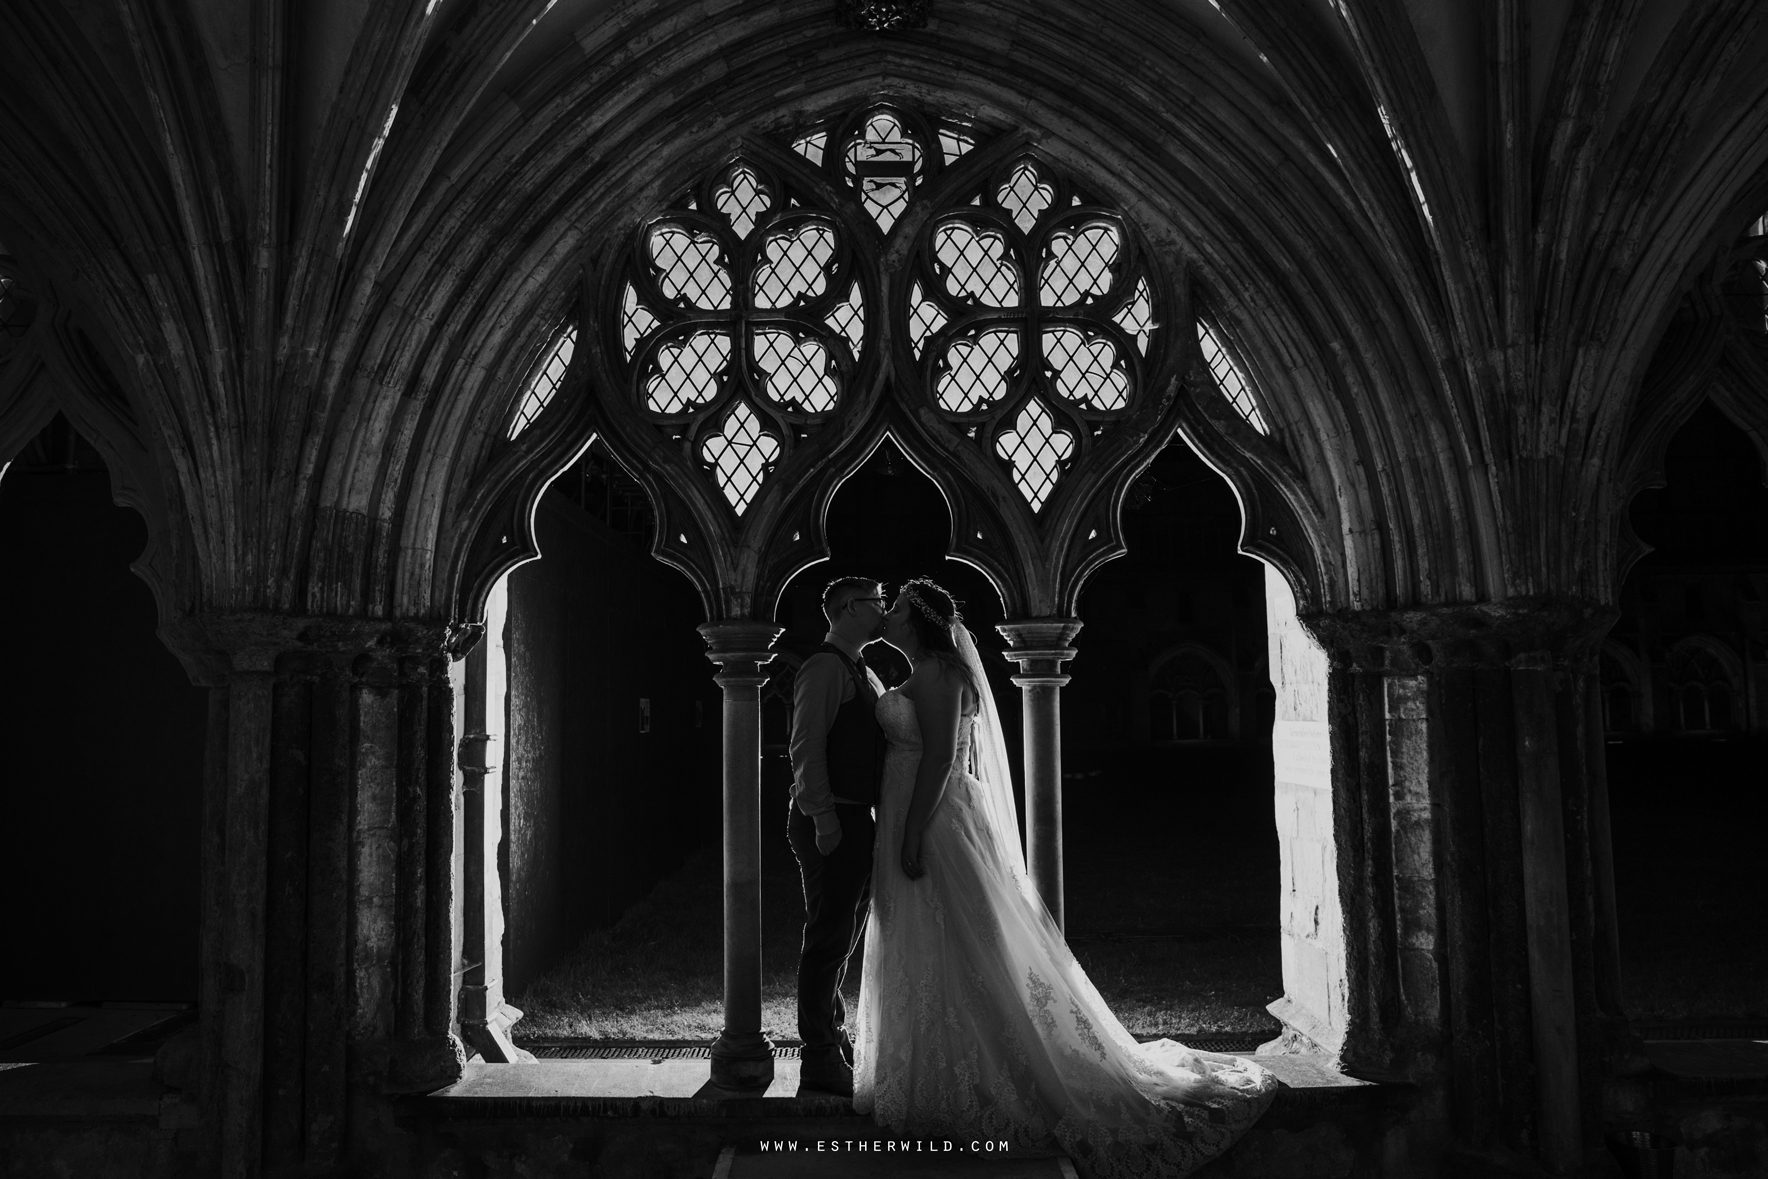 Norwich_Castle_Arcade_Grosvenor_Chip_Birdcage_Cathedral_Cloisters_Refectory_Wedding_Photography_Esther_Wild_Photographer_Norfolk_Kings_Lynn_3R8A3680.jpg